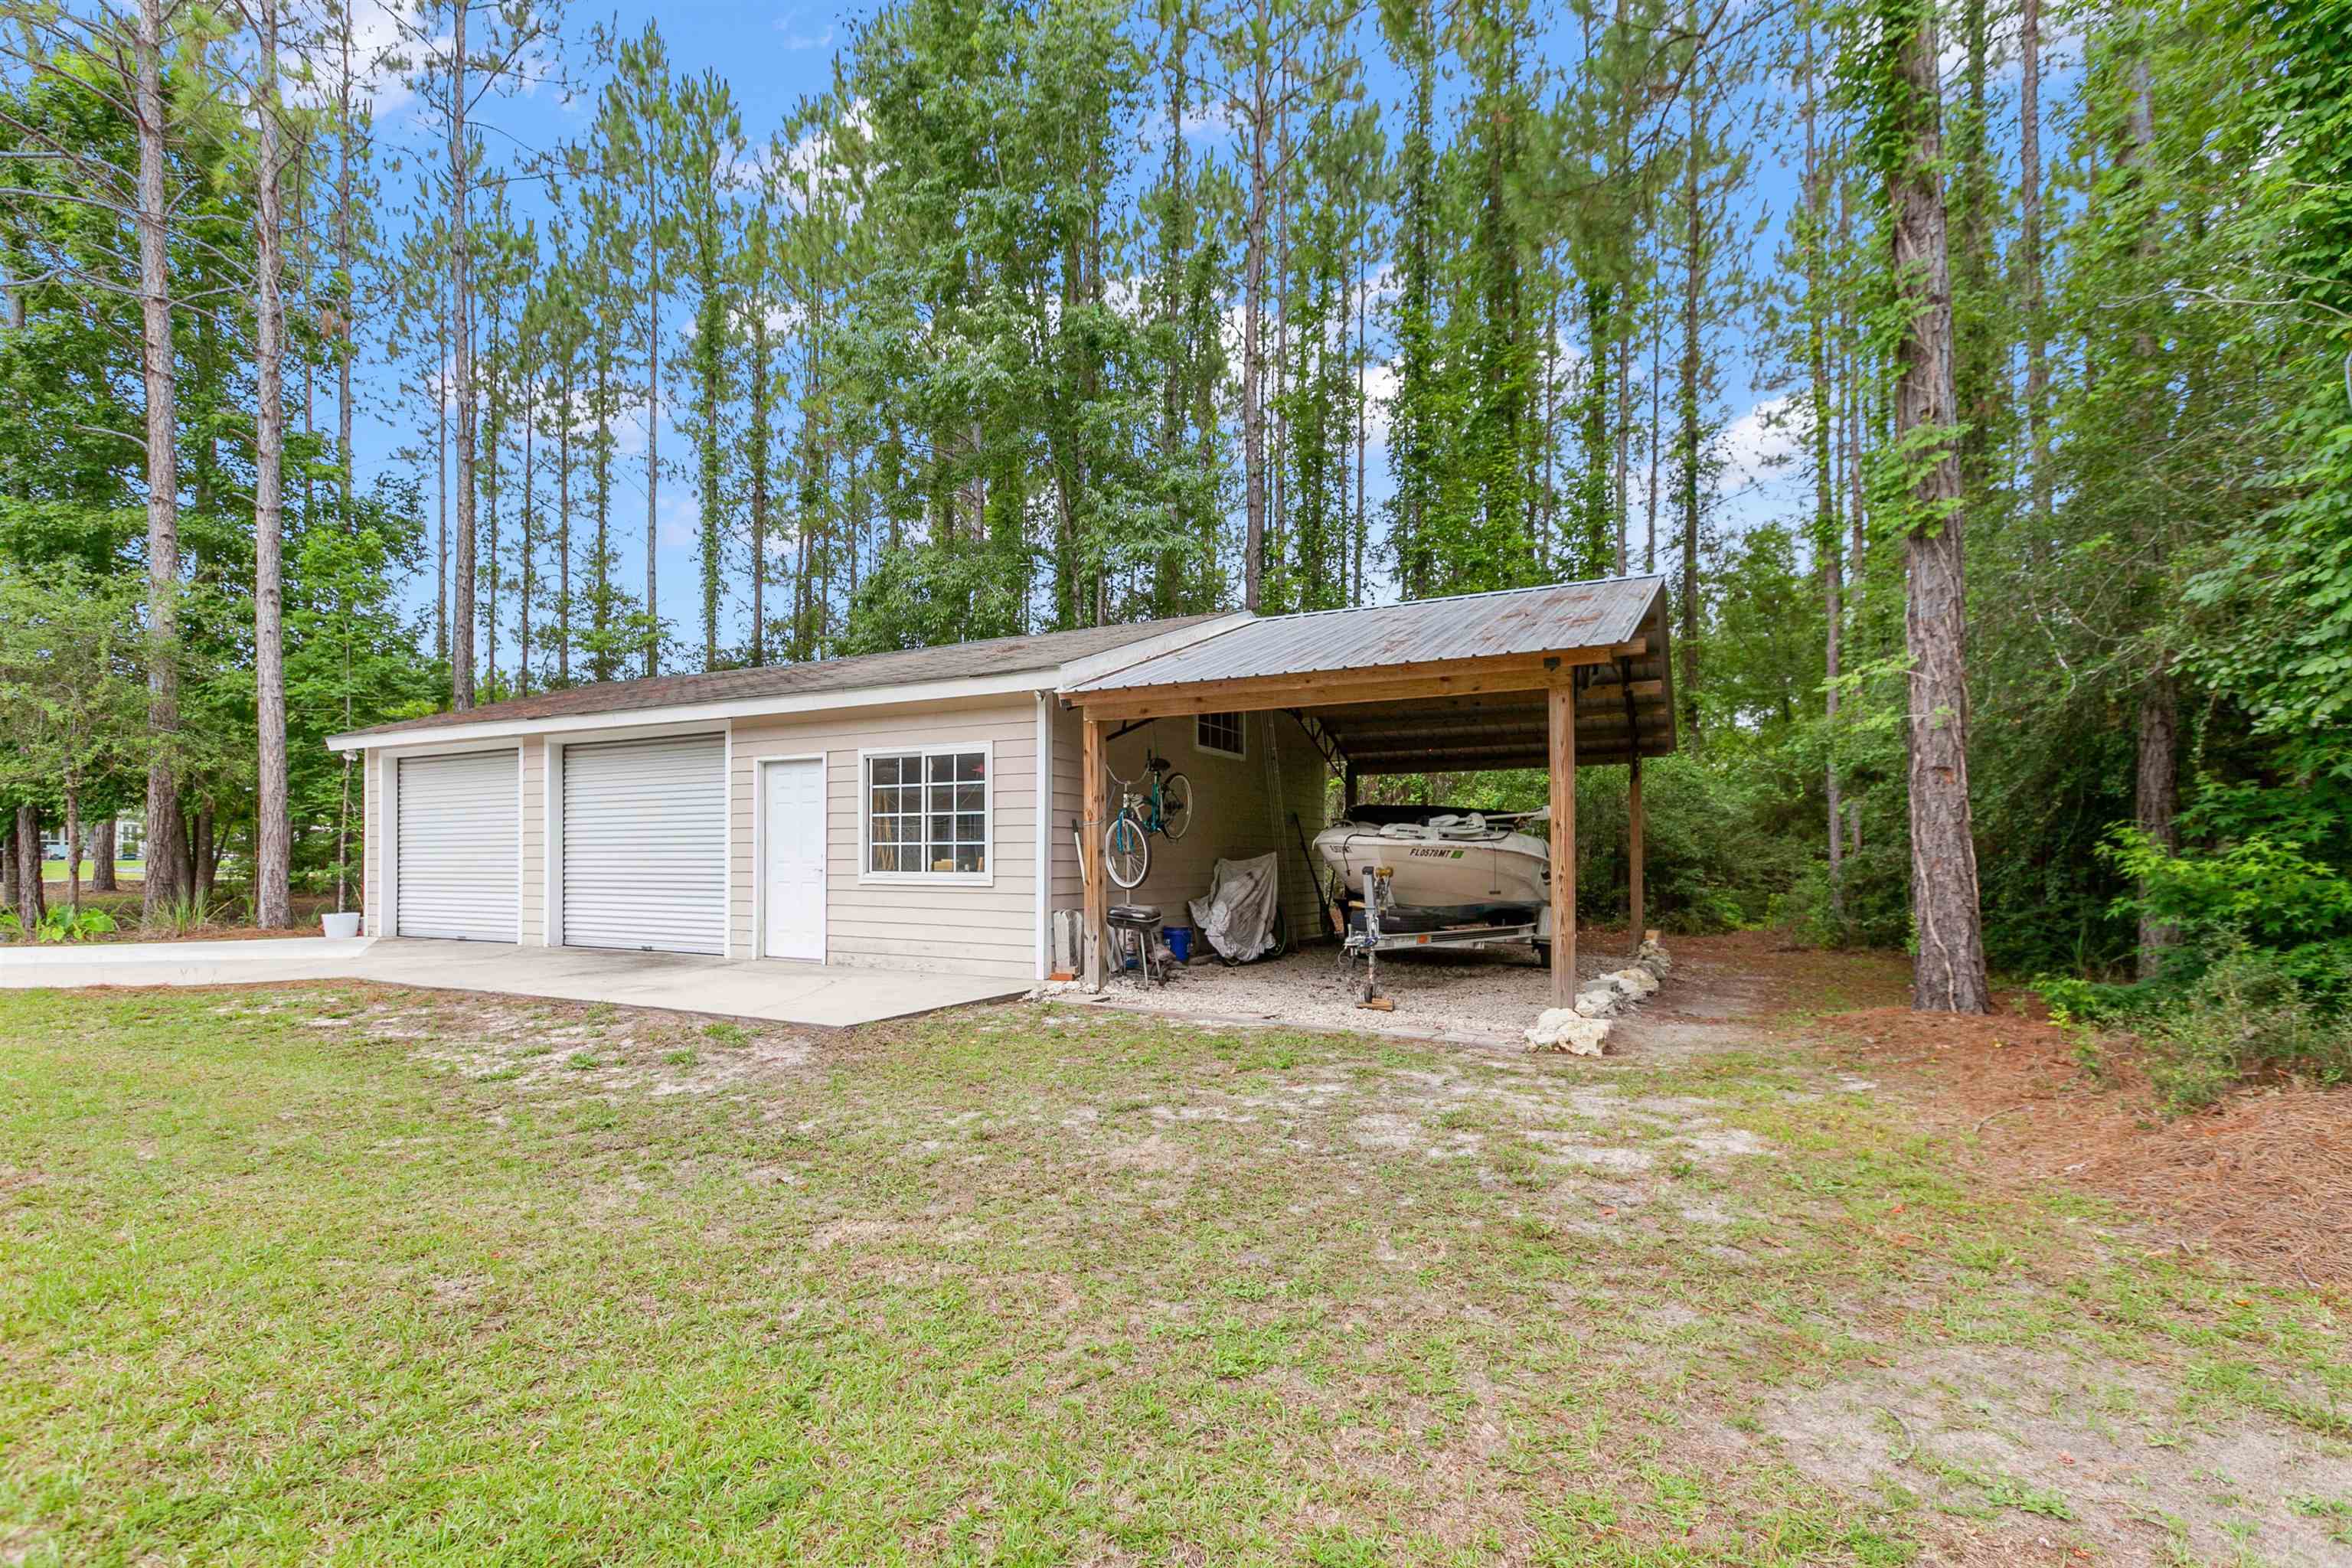 148 Sand Pine Trail,CRAWFORDVILLE,Florida 32327,4 Bedrooms Bedrooms,3 BathroomsBathrooms,Detached single family,148 Sand Pine Trail,368843